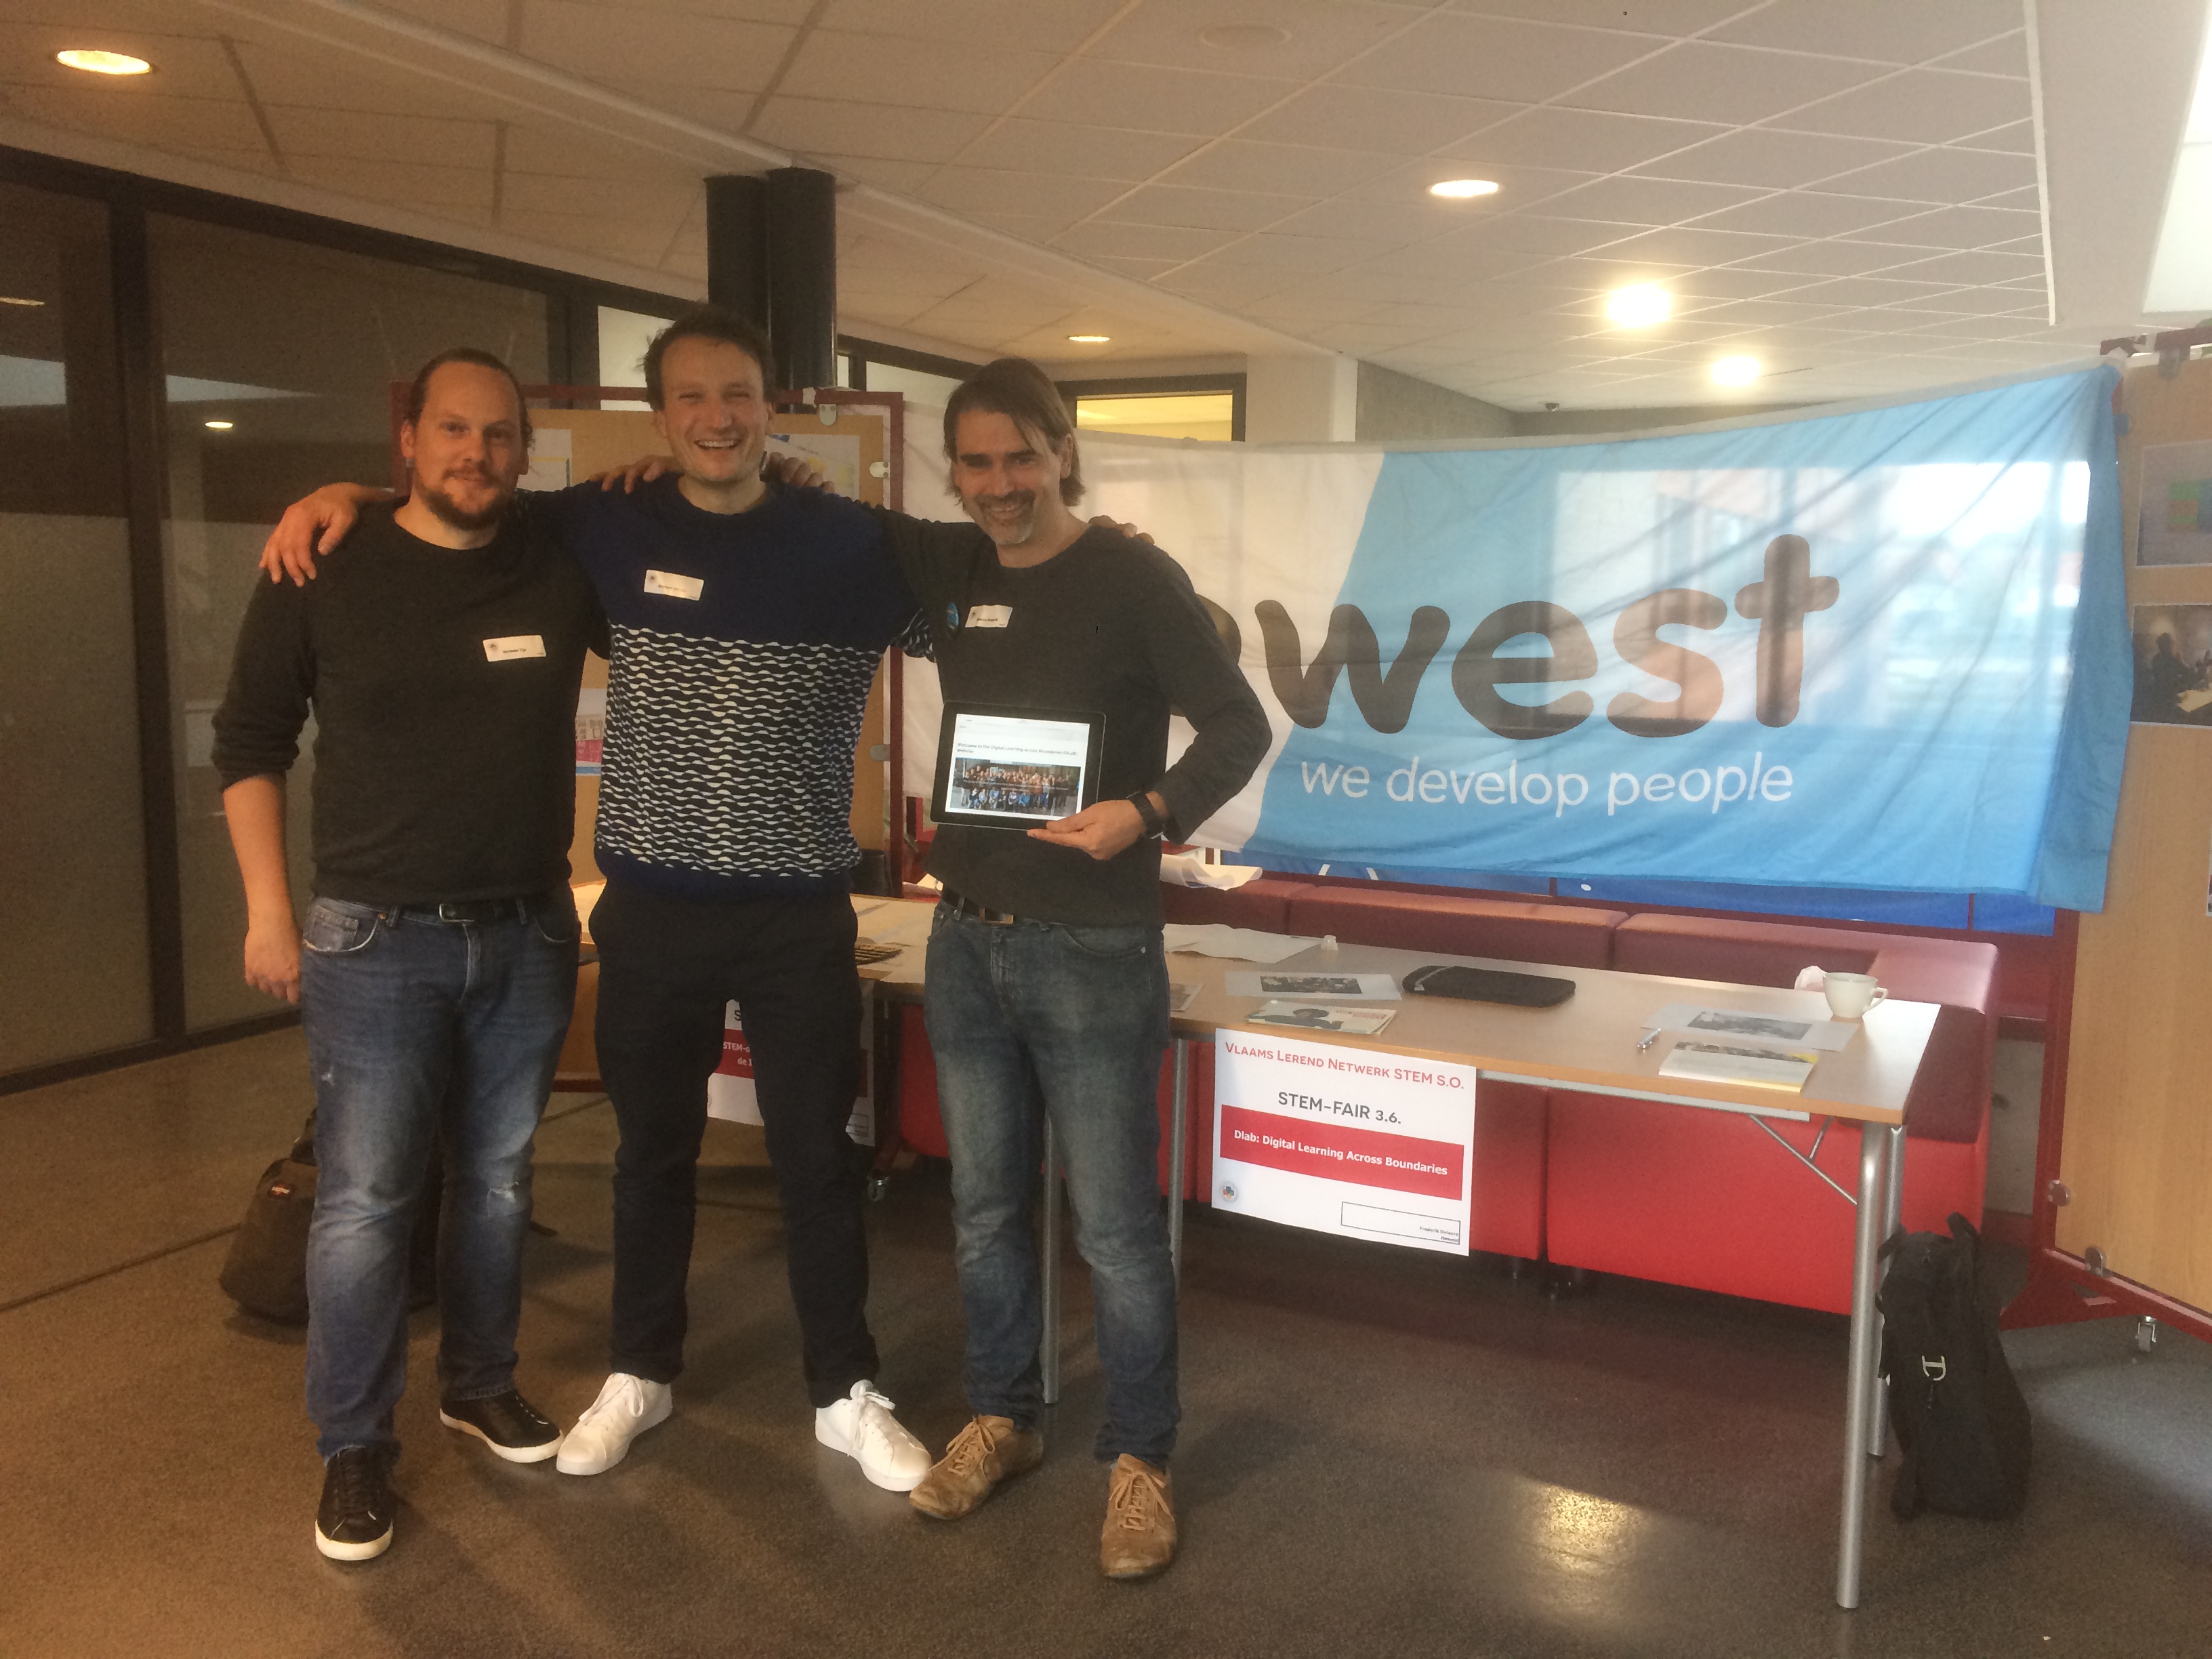 Howest lecturers presenting DLaB at the STEM-fair in Flanders